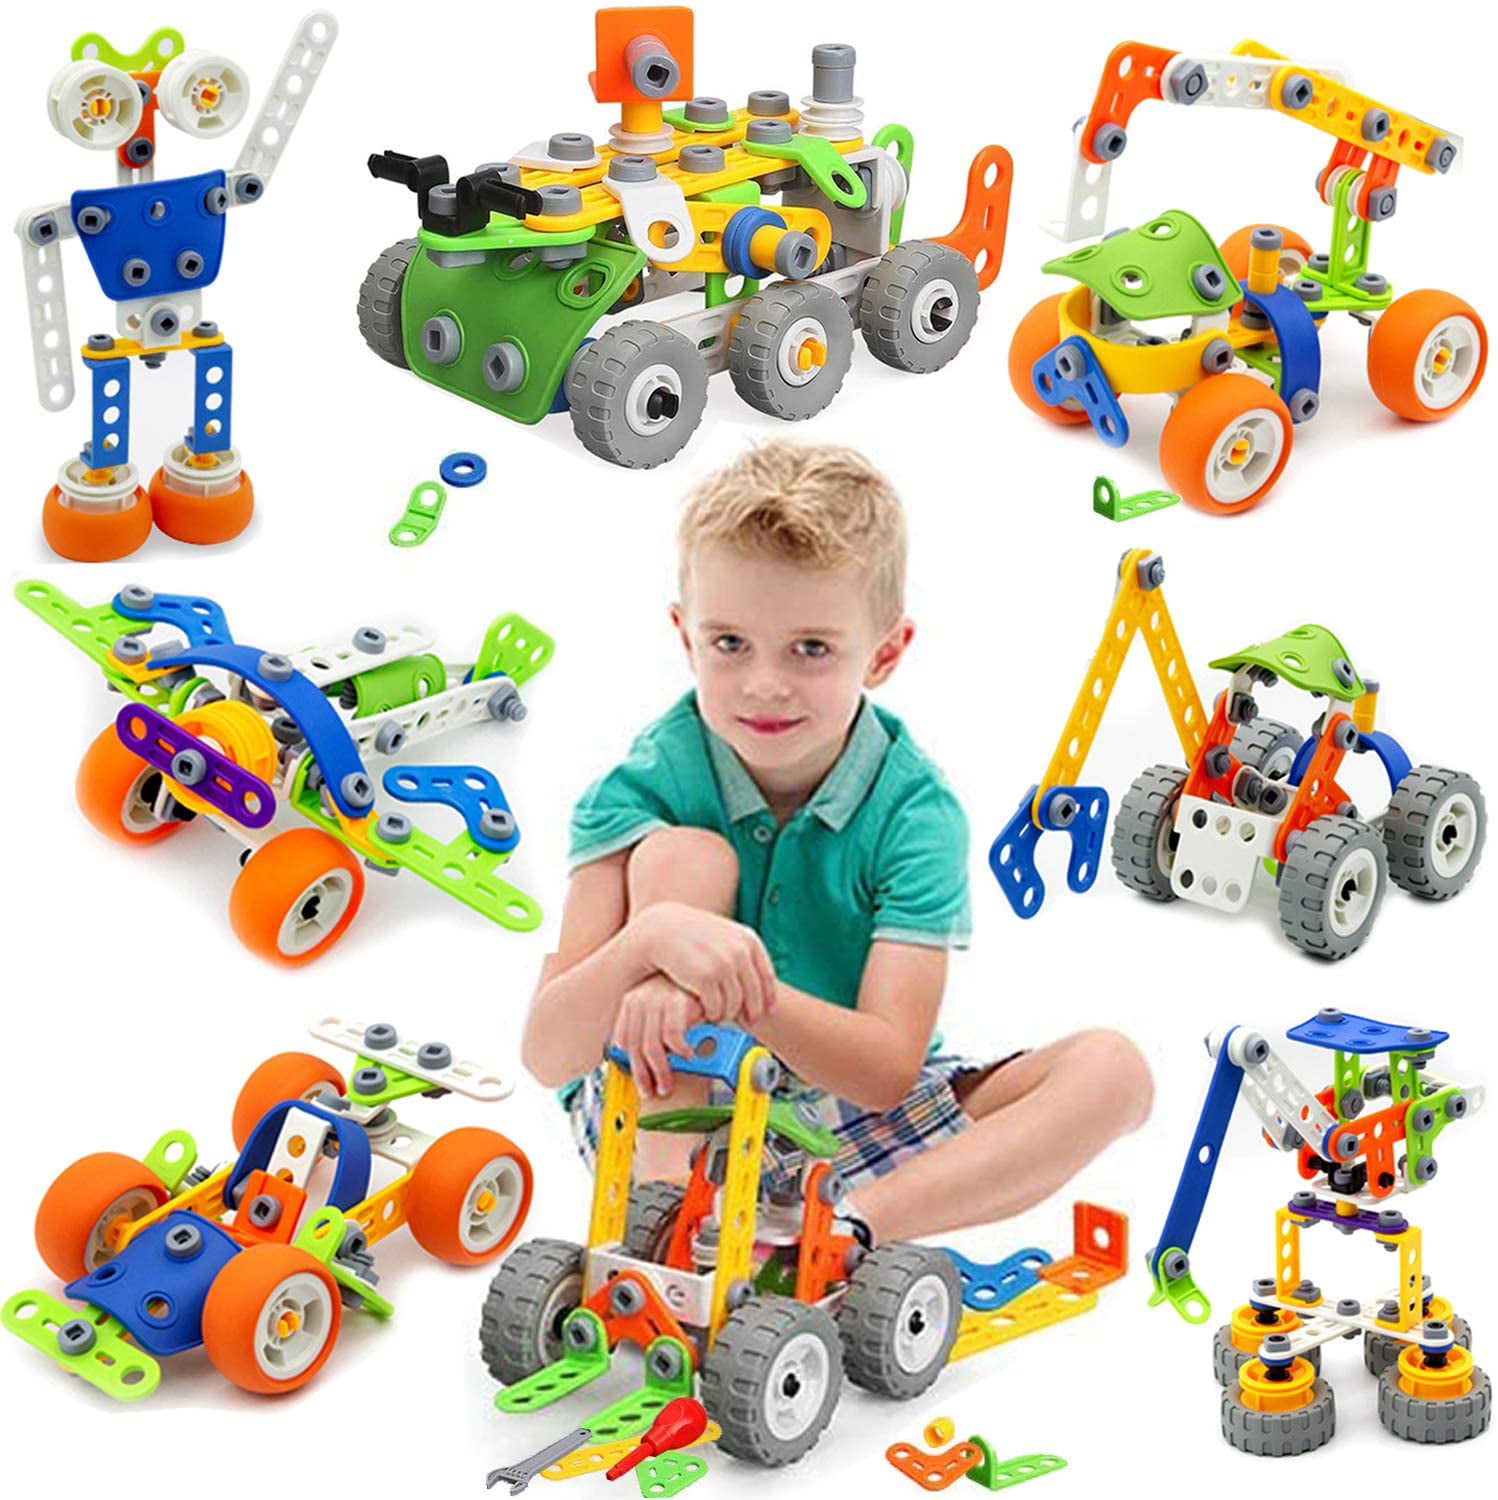 Educational Building Blocks STEM Learning Toys Kids Learning toys 184 Piece Construction Engineering for Boys and Girls Ages 4 5 6 7 8 9 Year Old 